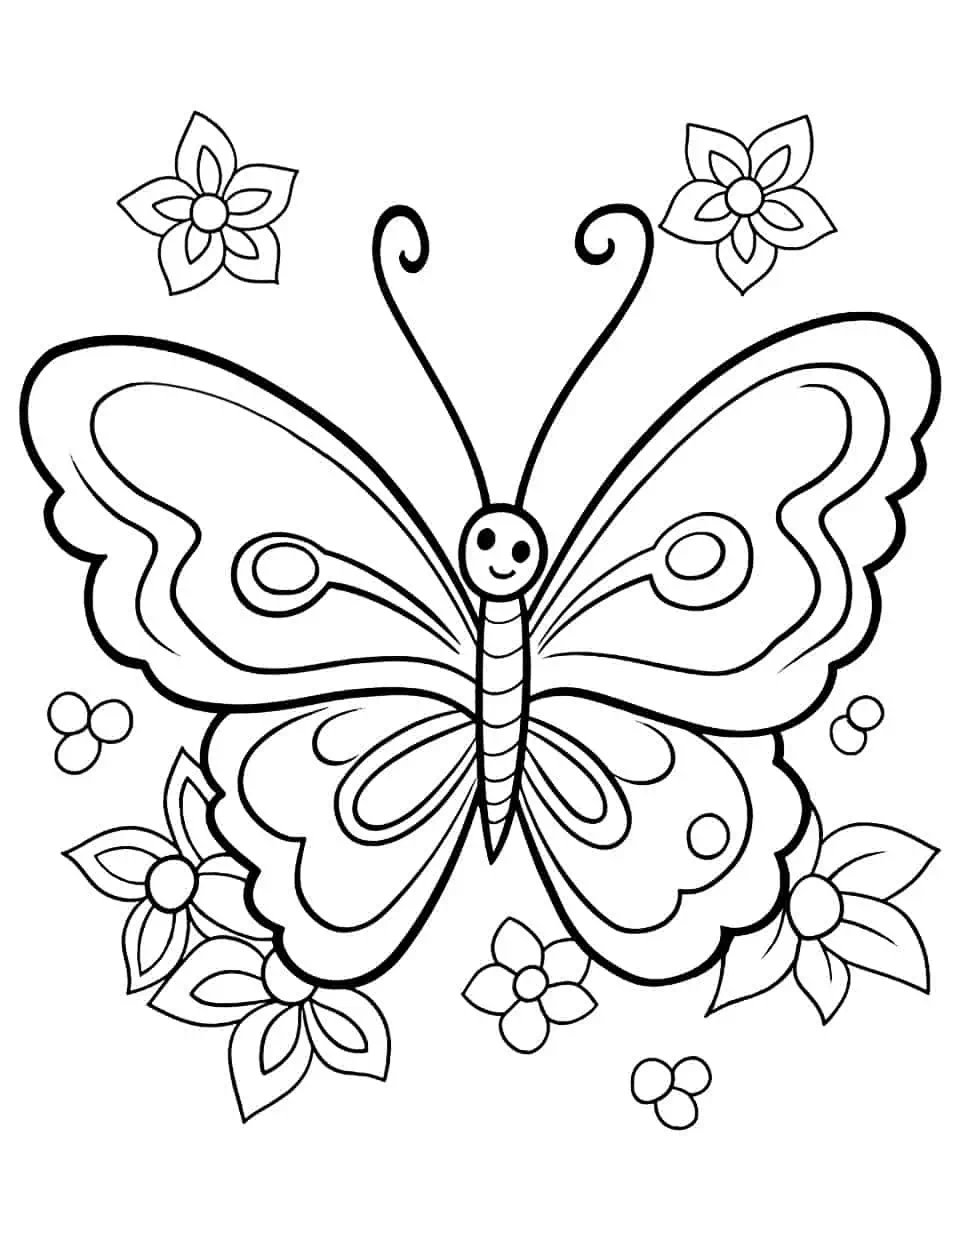 Clipart Cuties Butterfly Coloring Page - A simple coloring page with adorable cartoon-style butterflies and flowers.